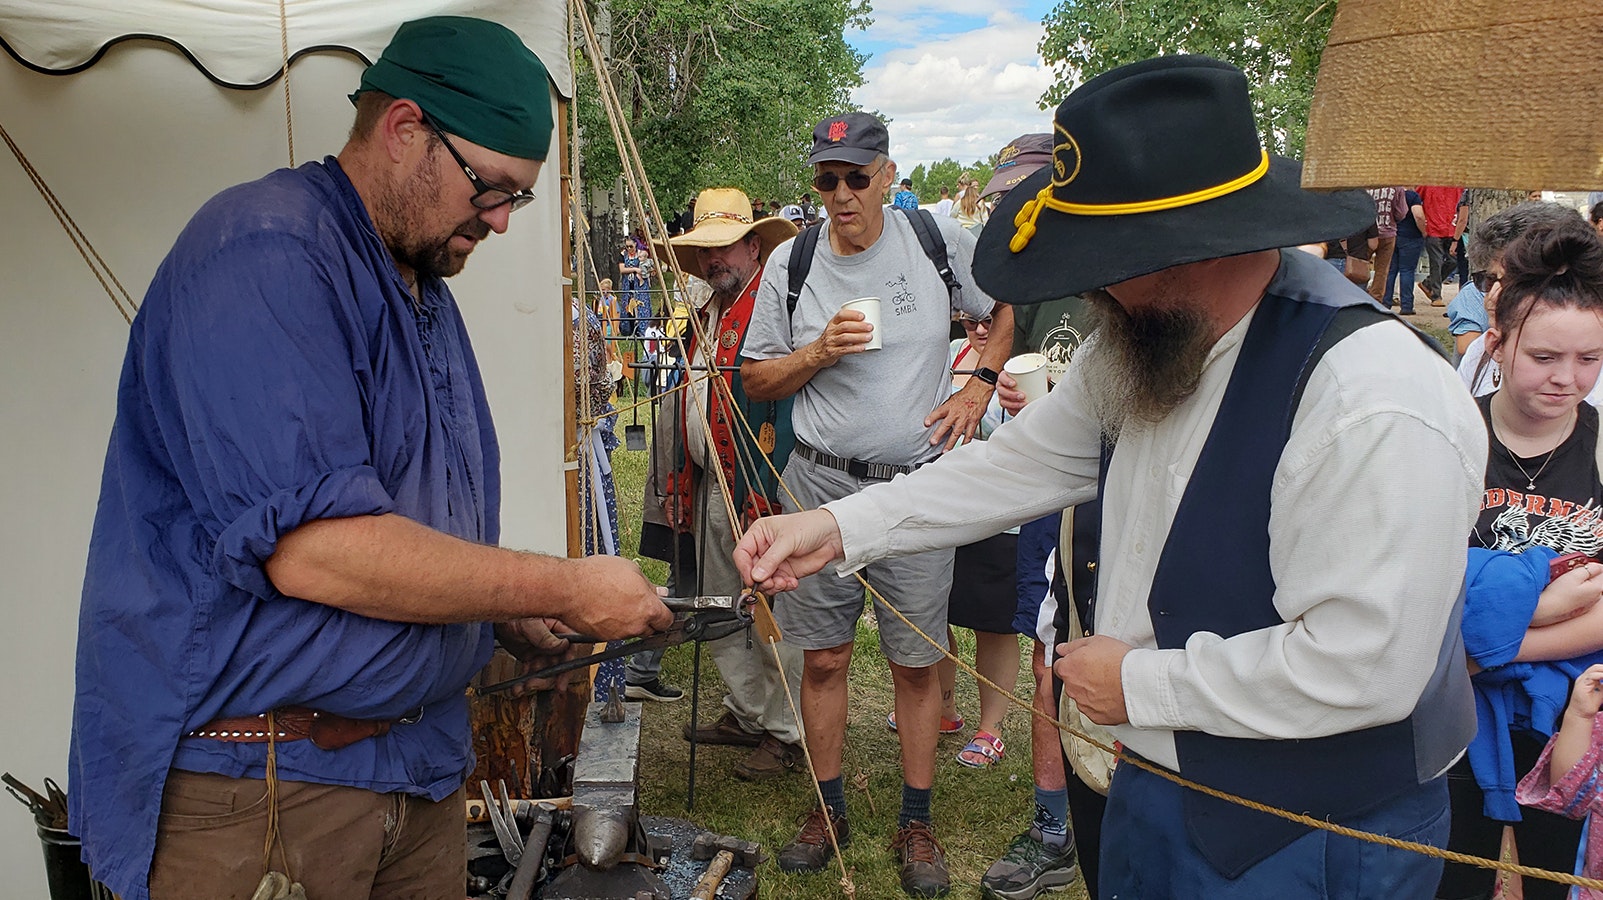 Jim Hamilton drops a couple of keys between the glowing hot ends of a new key ring being made for him by blacksmith Jesse Colton at the Fort Bridger Rendezvous.